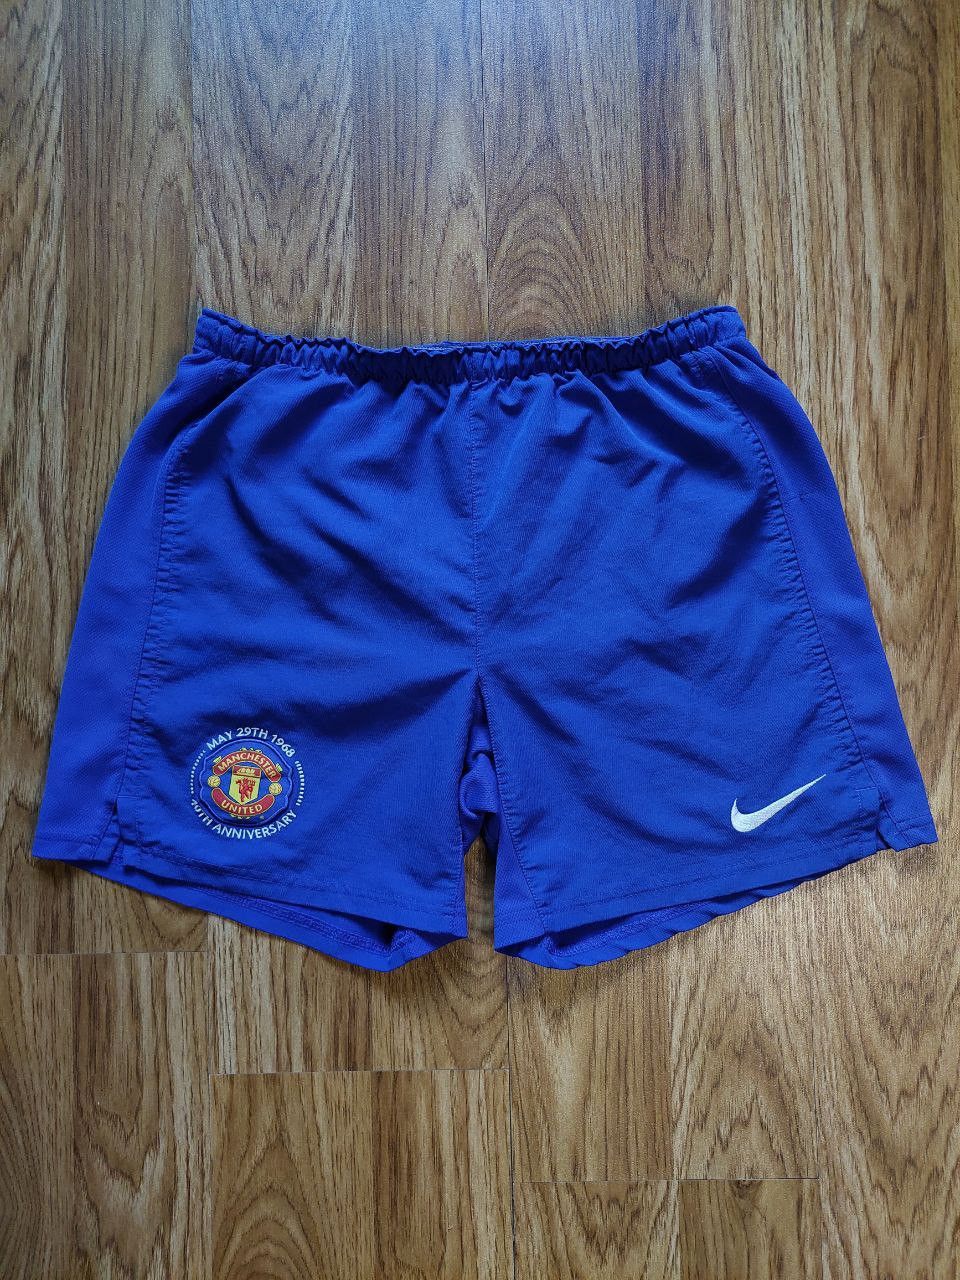 Pre-owned Nike X Soccer Jersey Vintage Nike Manchester United Blue Shorts 00s